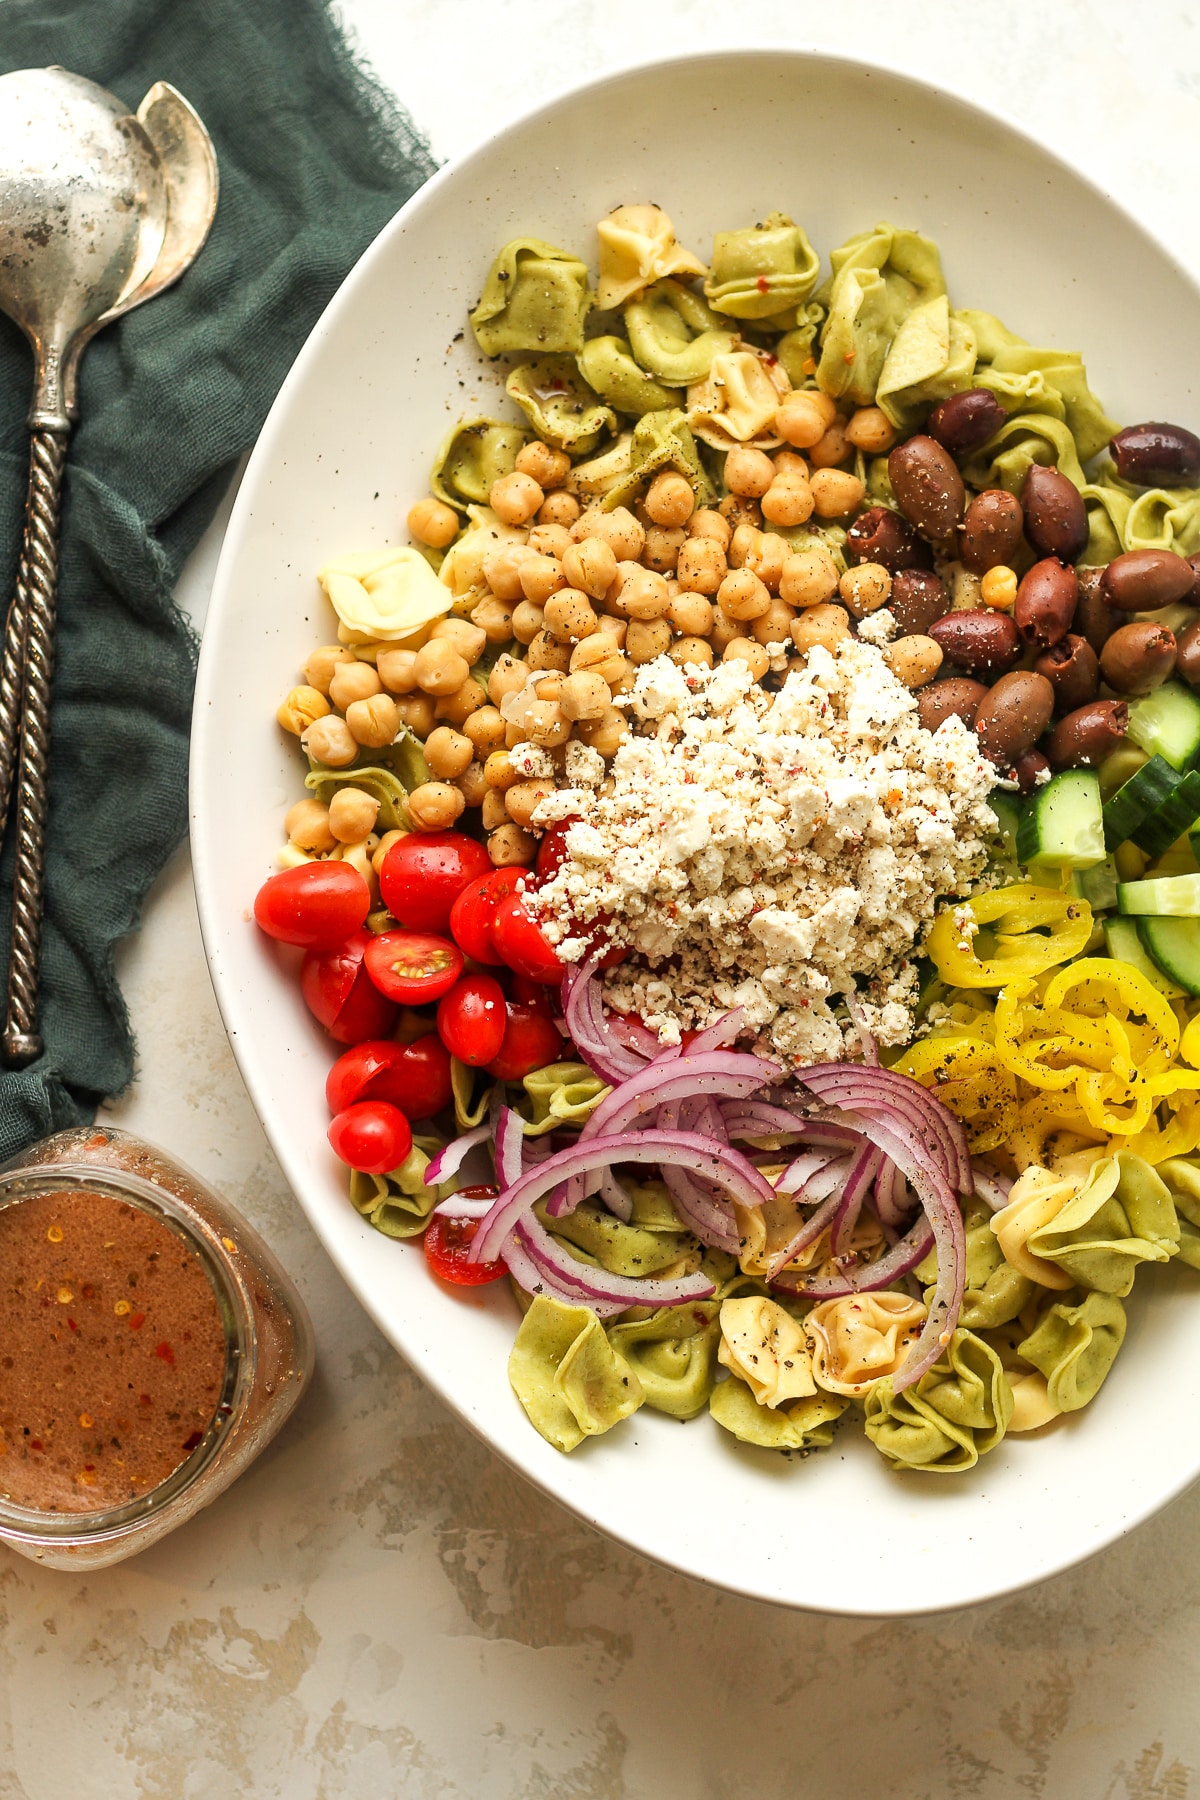 An oblong bowl of the pasta salad ingredients separated by ingredient with a jar of dressing.